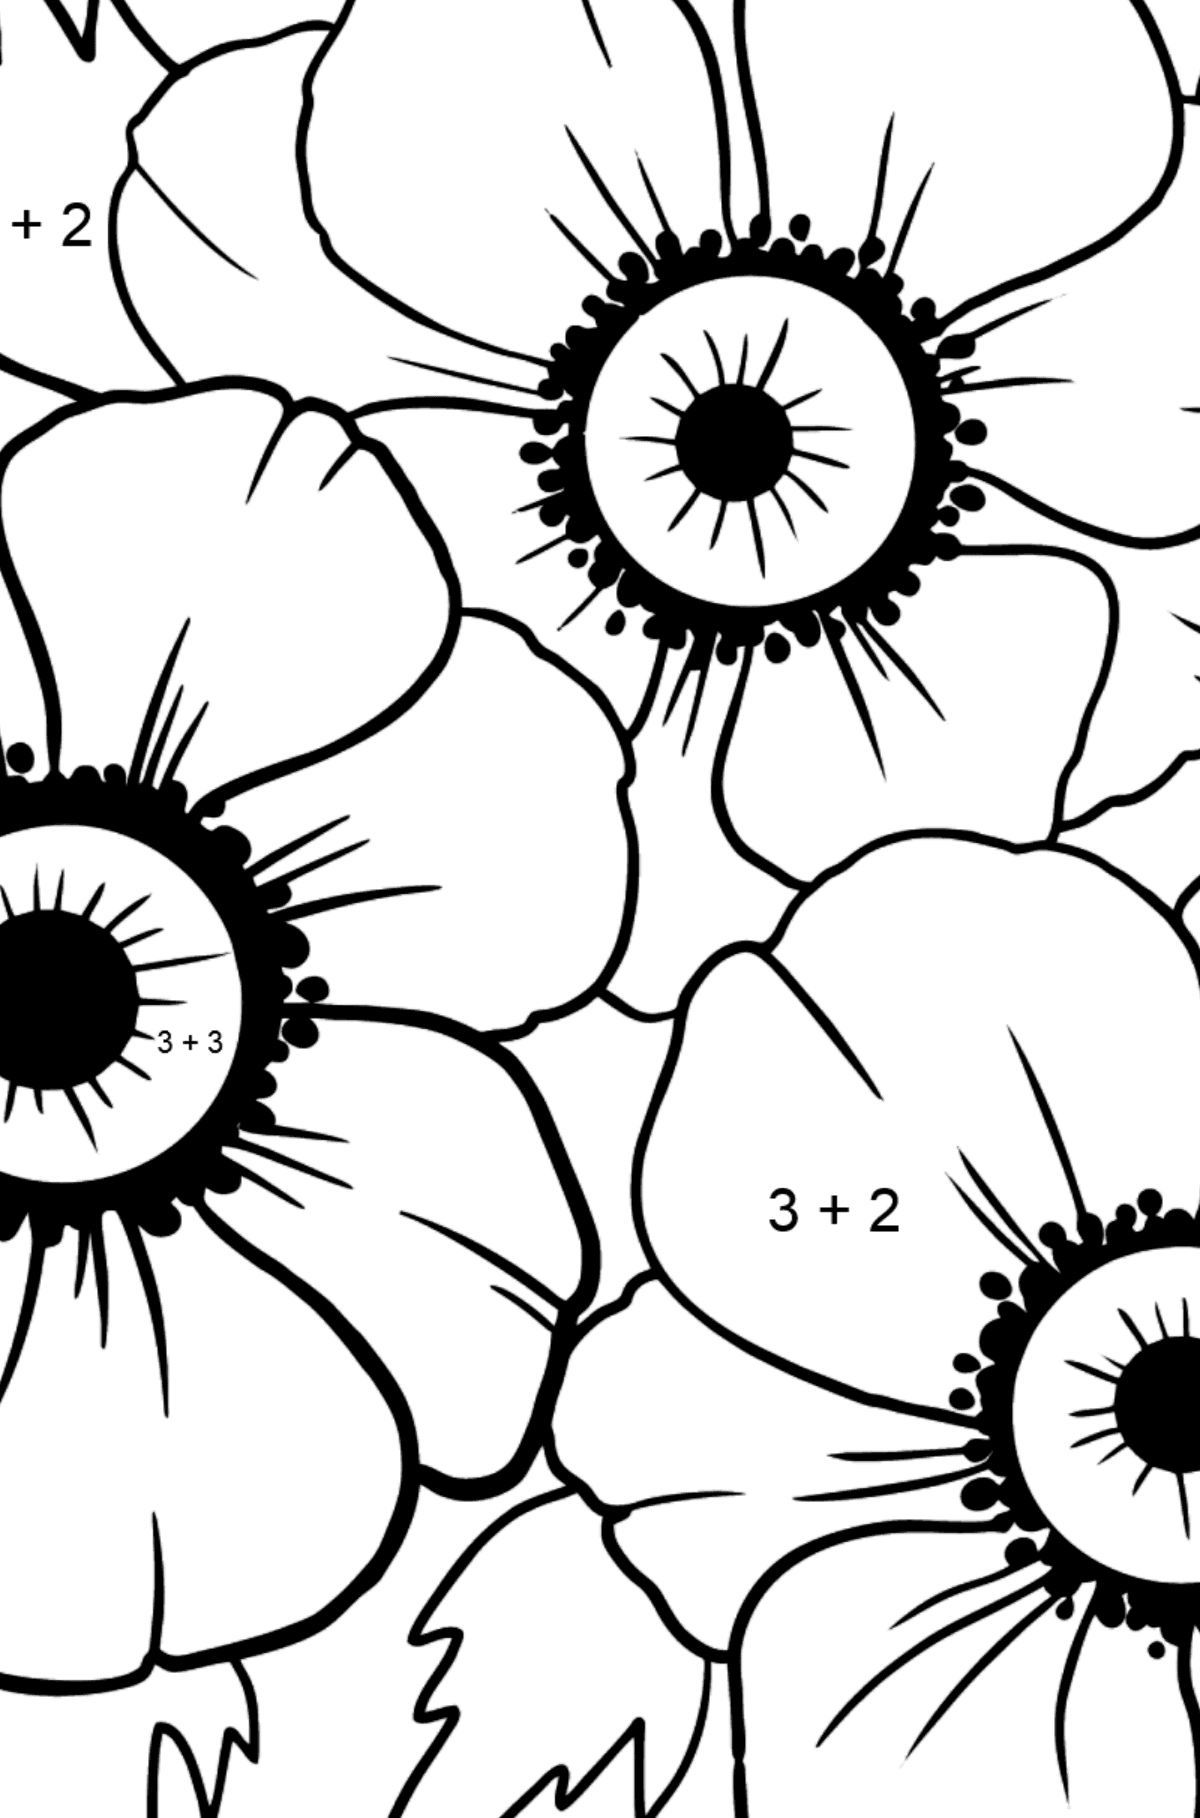 Coloring Page with big flower - A Red and Pink Anemone Coronaria - Math Coloring - Addition for Kids